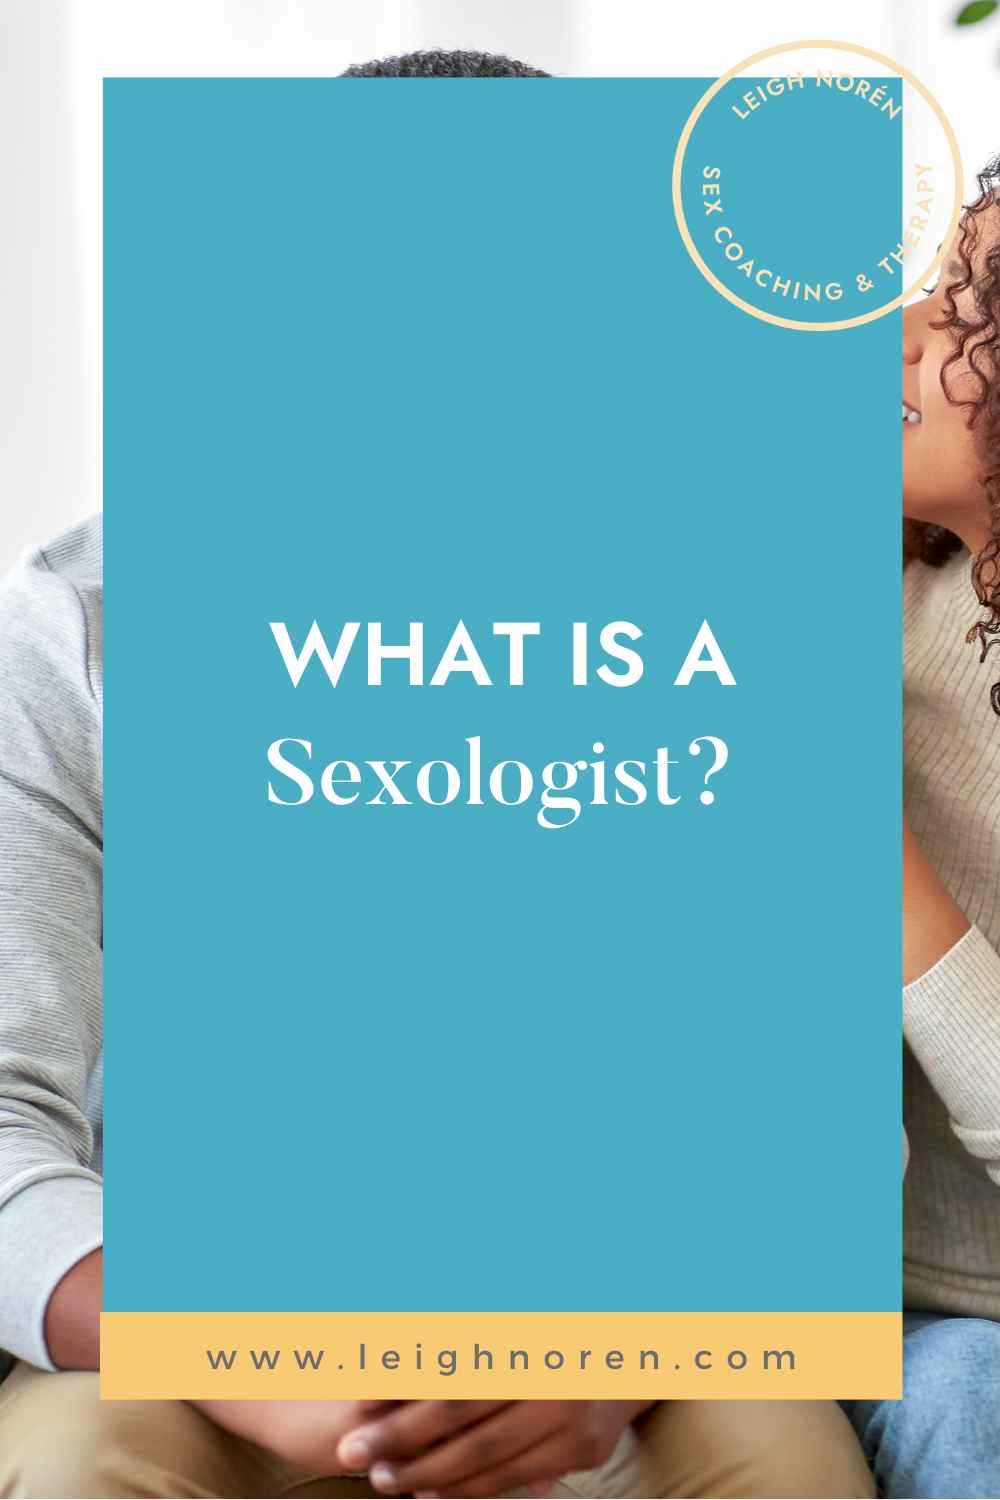 What is a Sexologist?